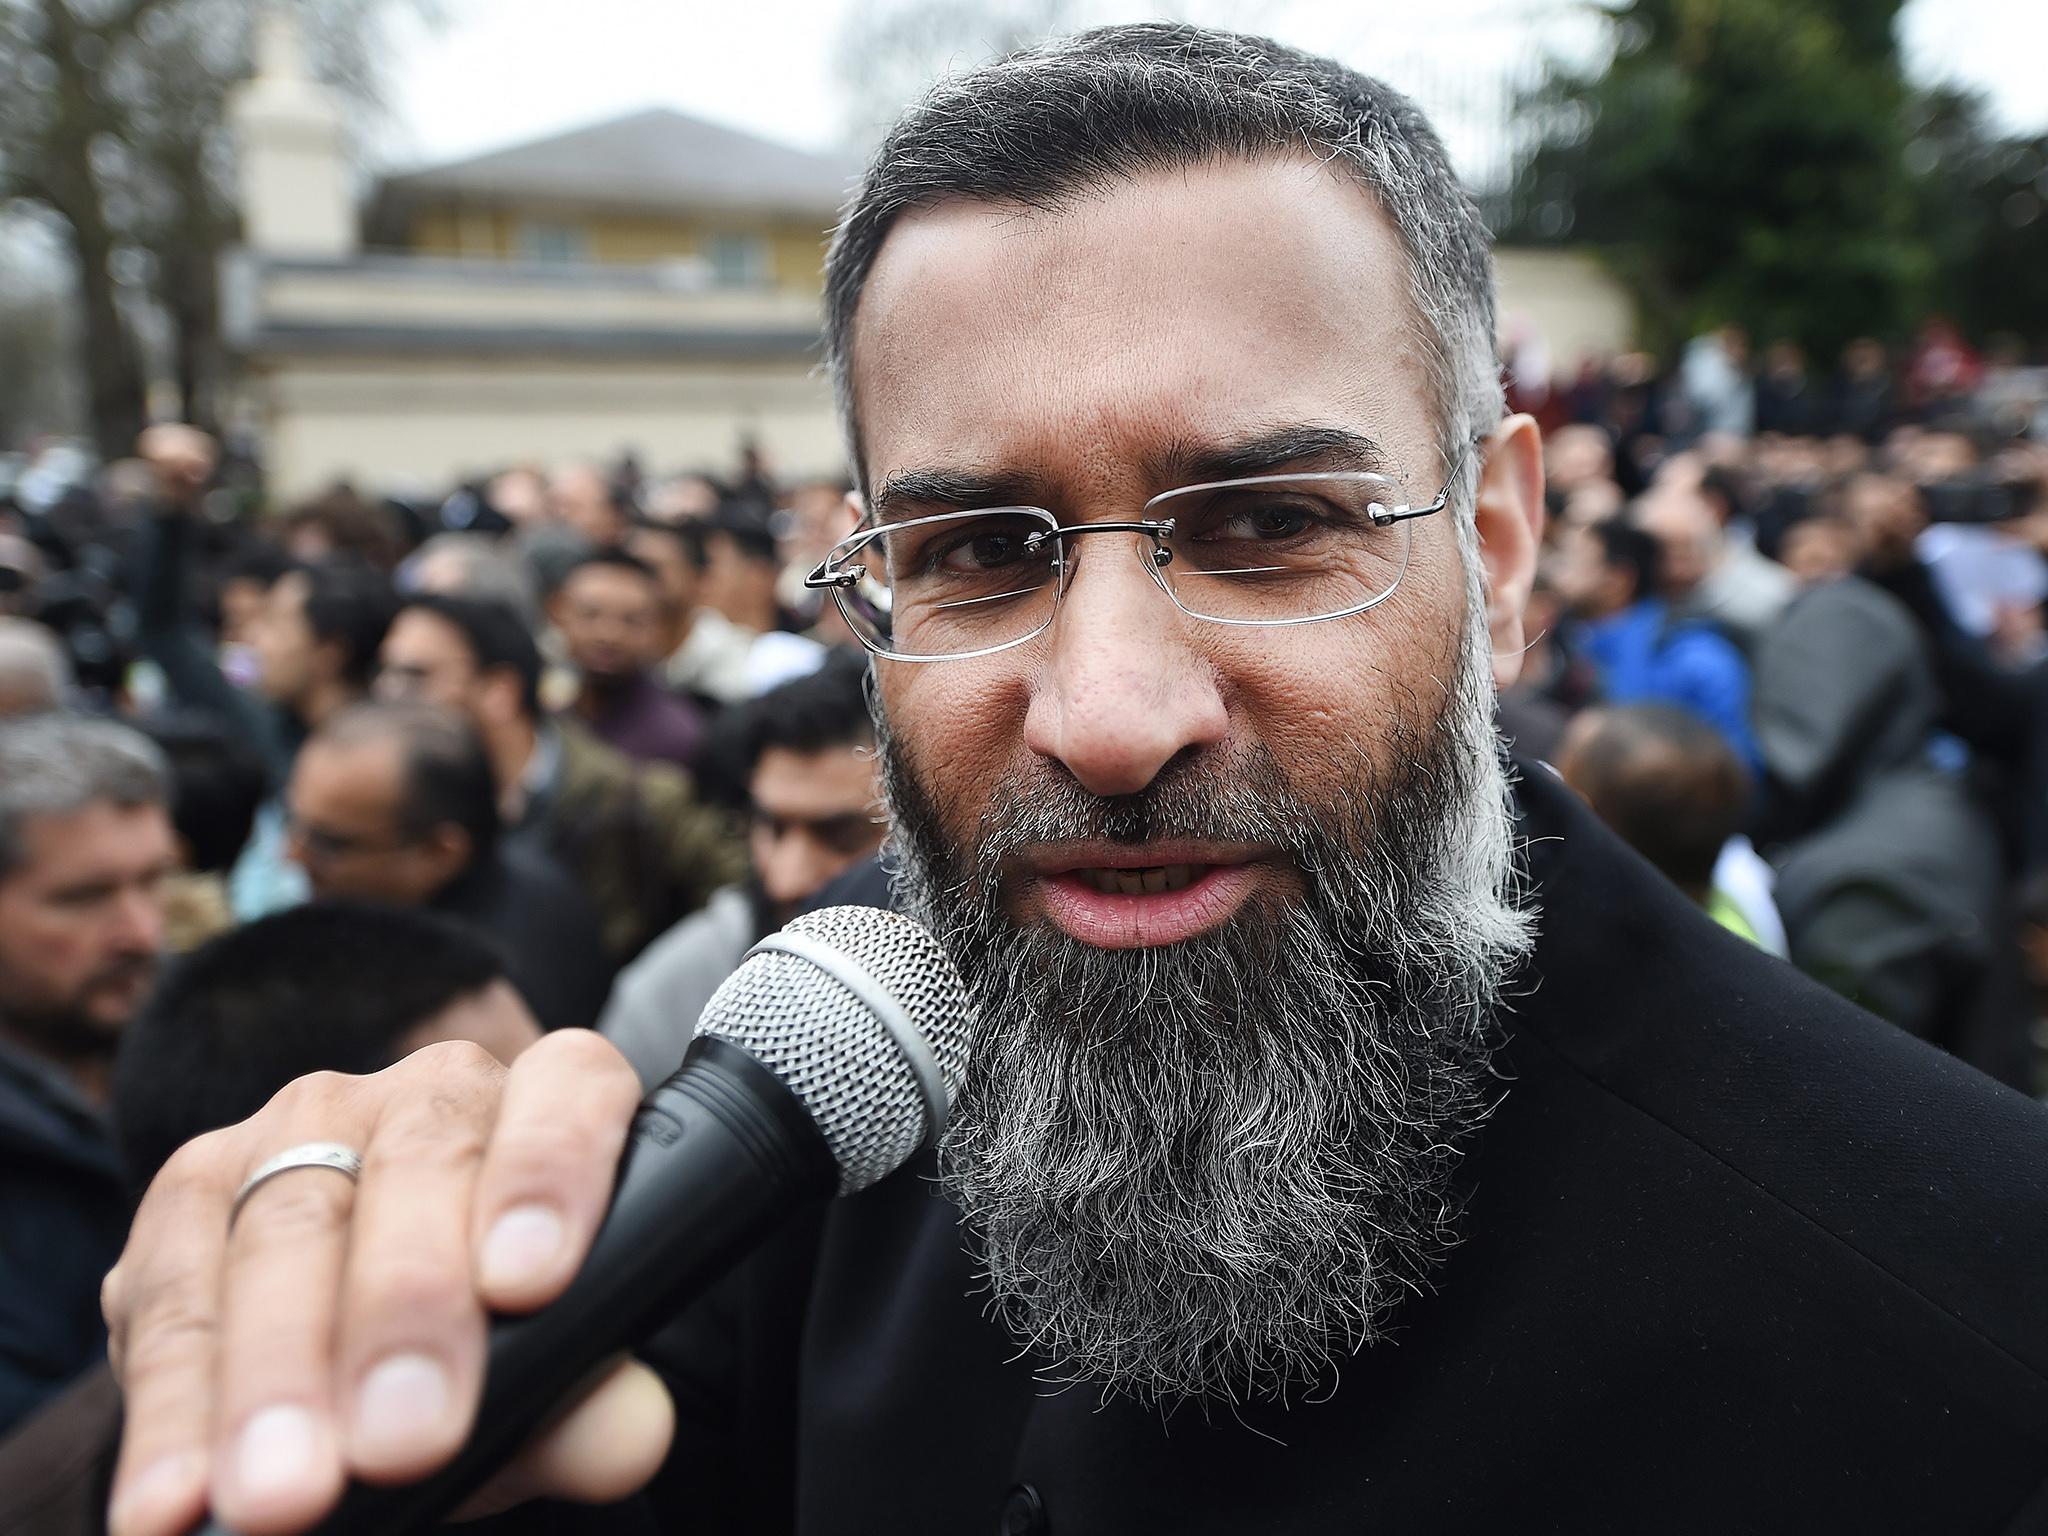 Anjem Choudary, who was convicted for inciting extremism over social media, during a rally in London